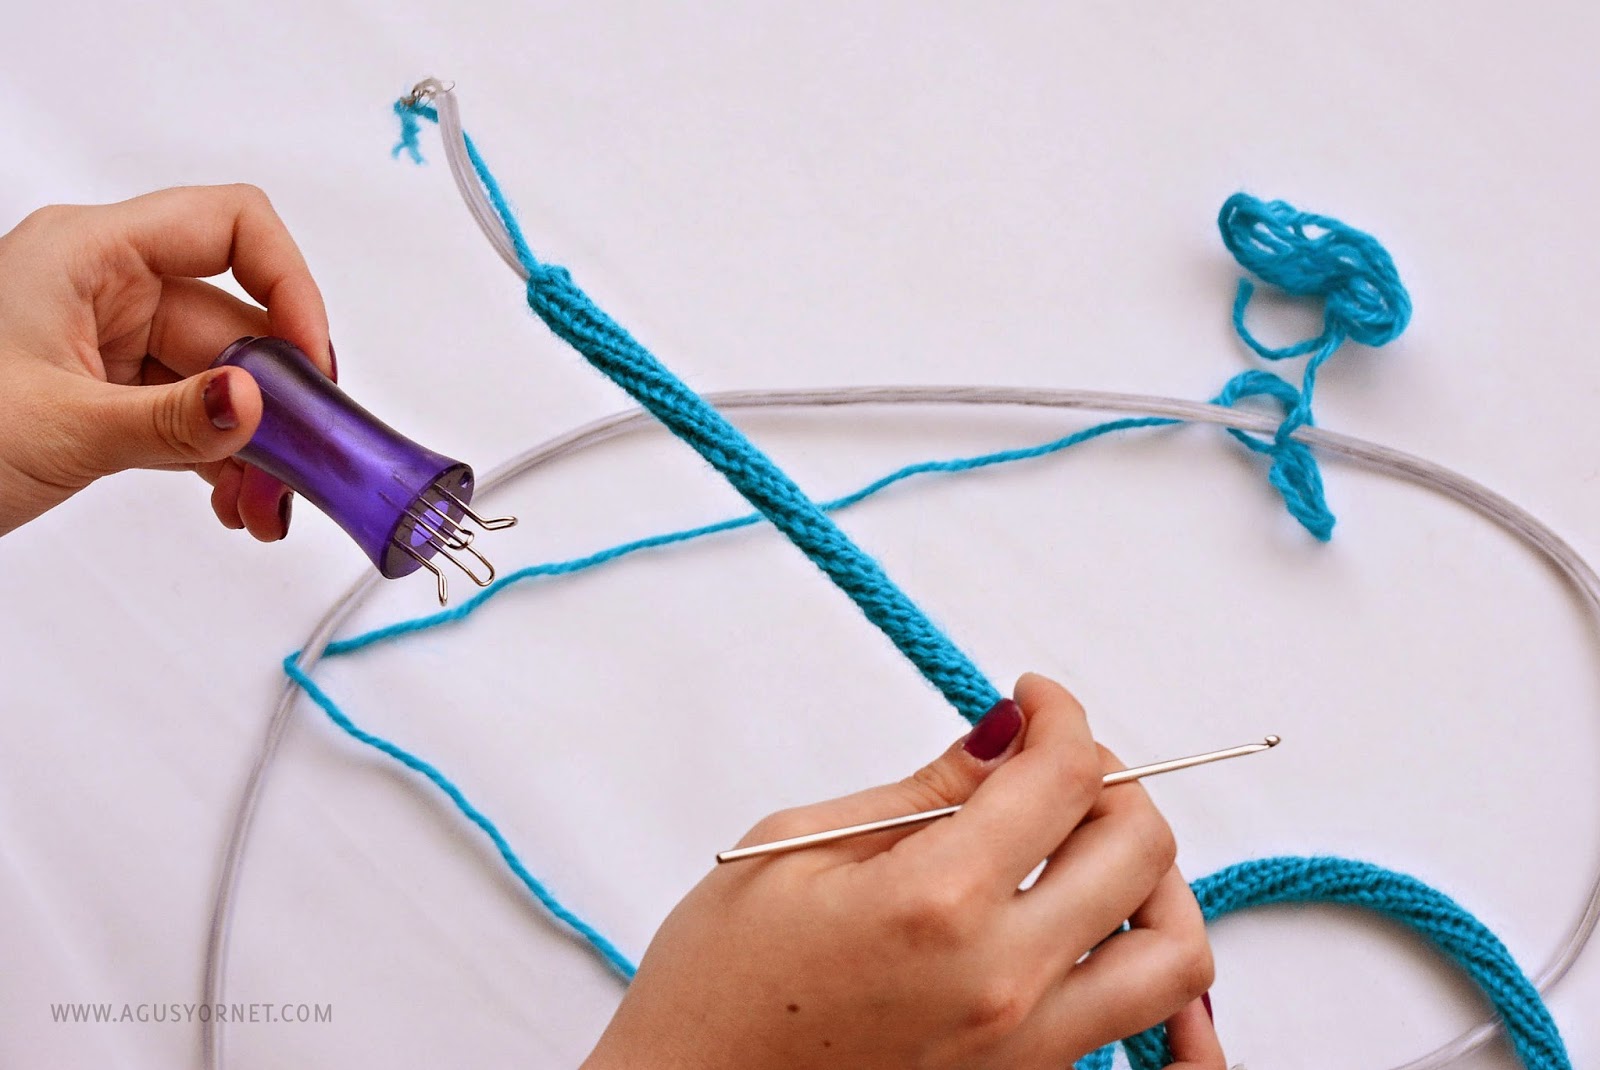 French Knitting tutorial to learn how to make a knitted lamp